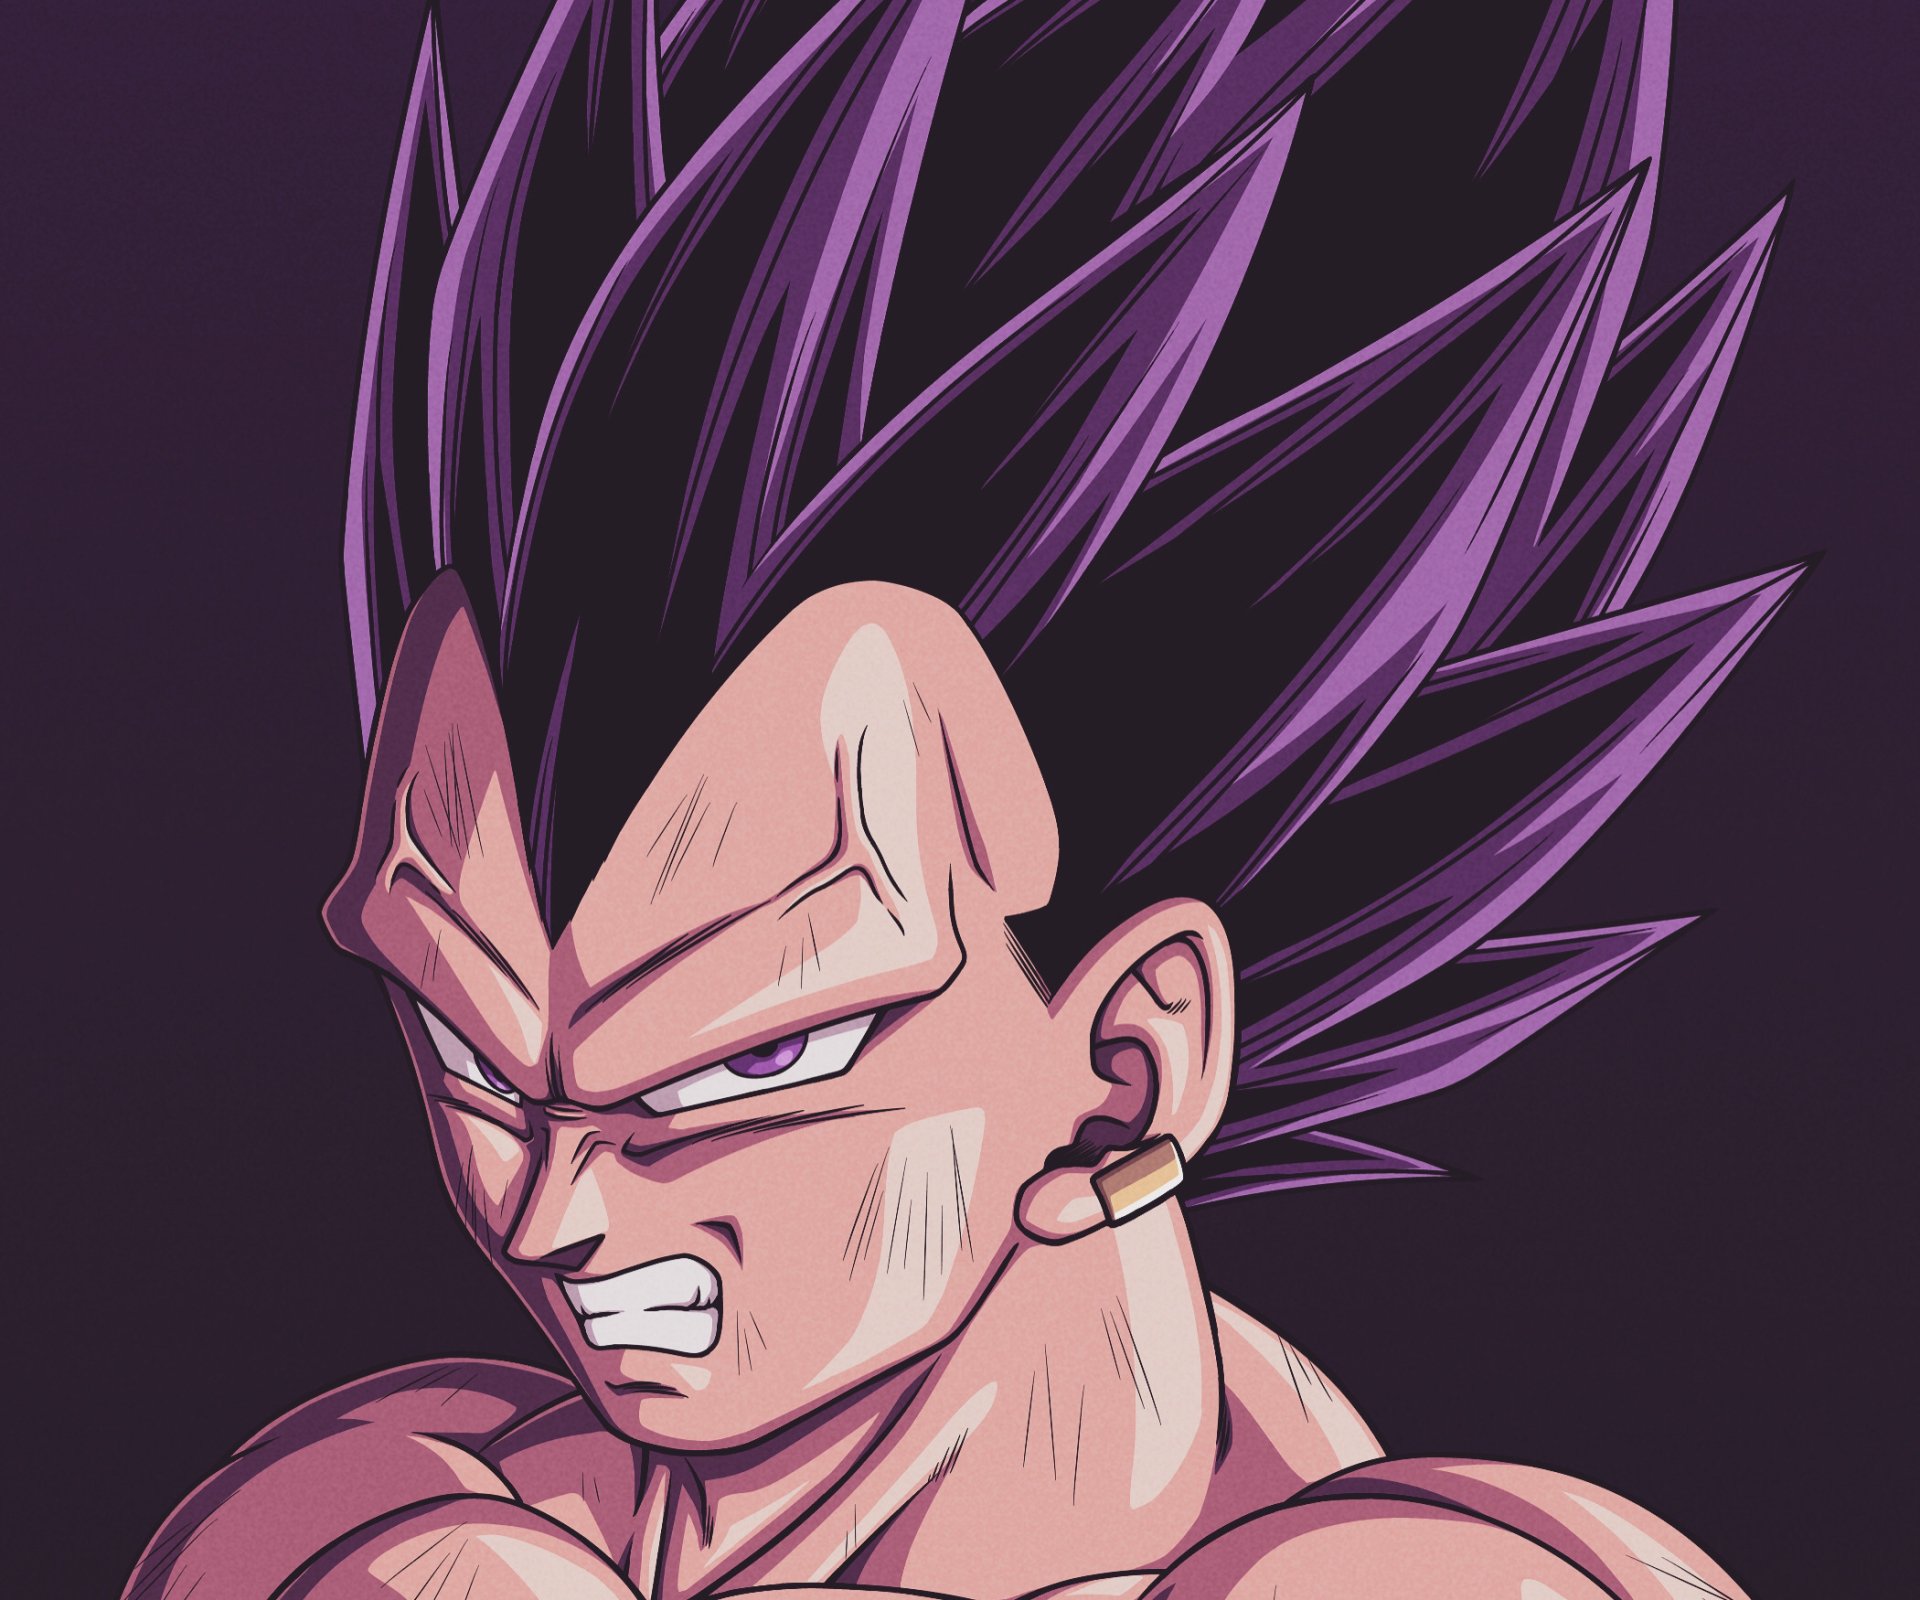 Top 10 Vegeta Ultra Ego Wallpaper for iphone and PC